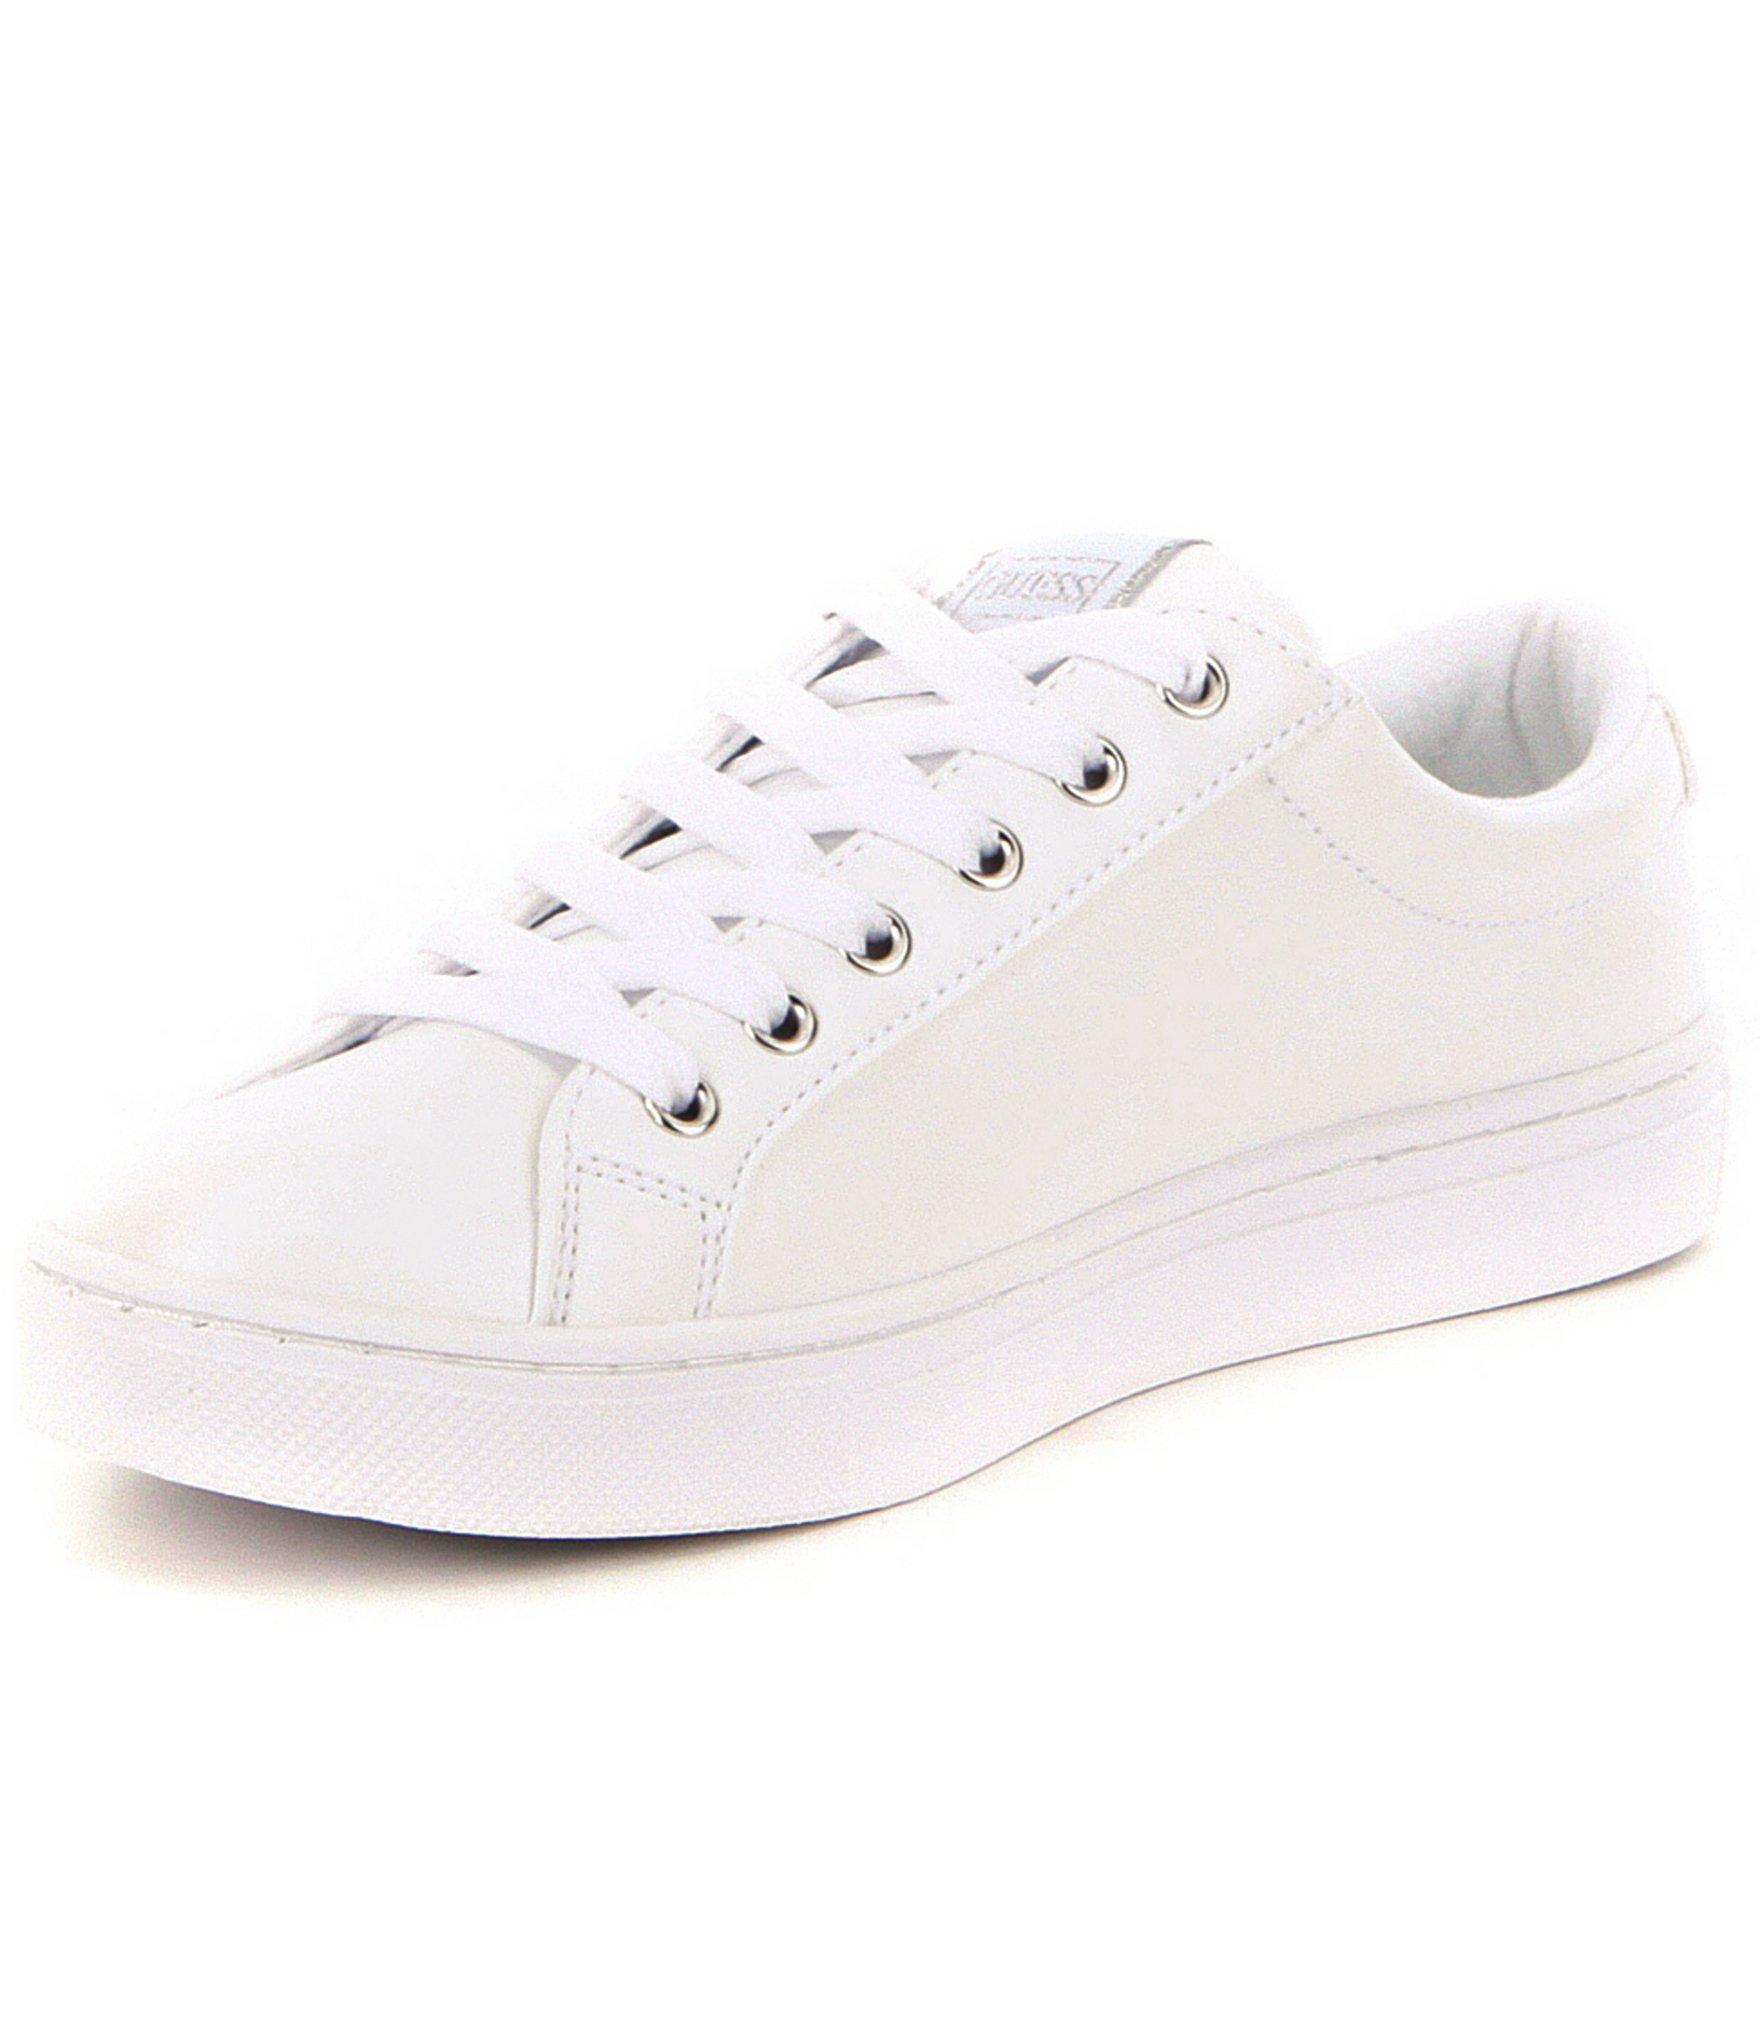 Lyst - Guess Jaida Lace-up Leather-upper Sneakers in White for Men